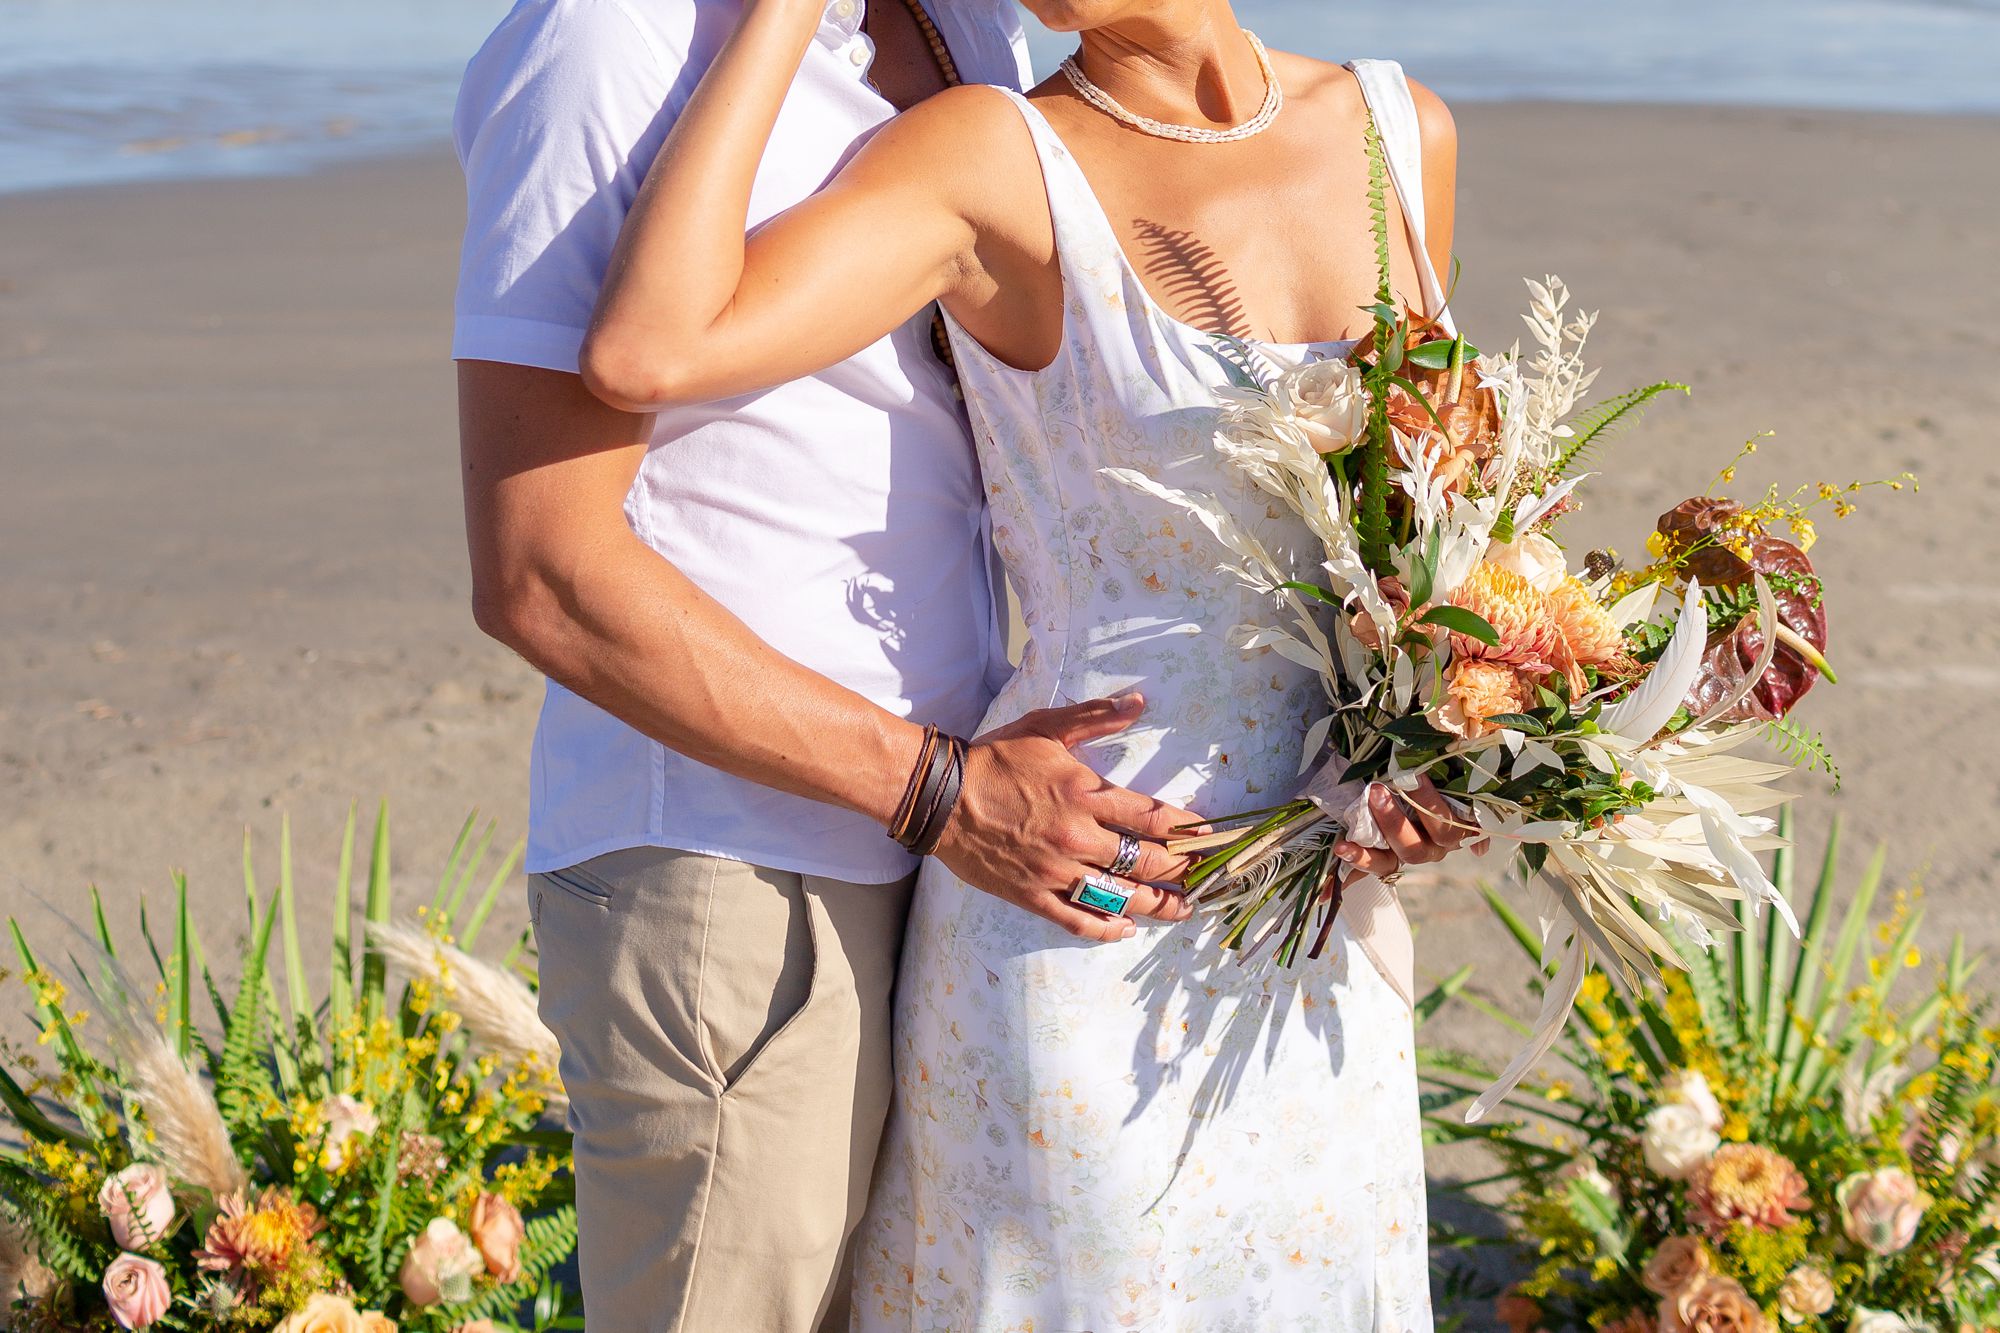 A groom holds bride around the waist in front of their elopement ceremony flower arrangements.